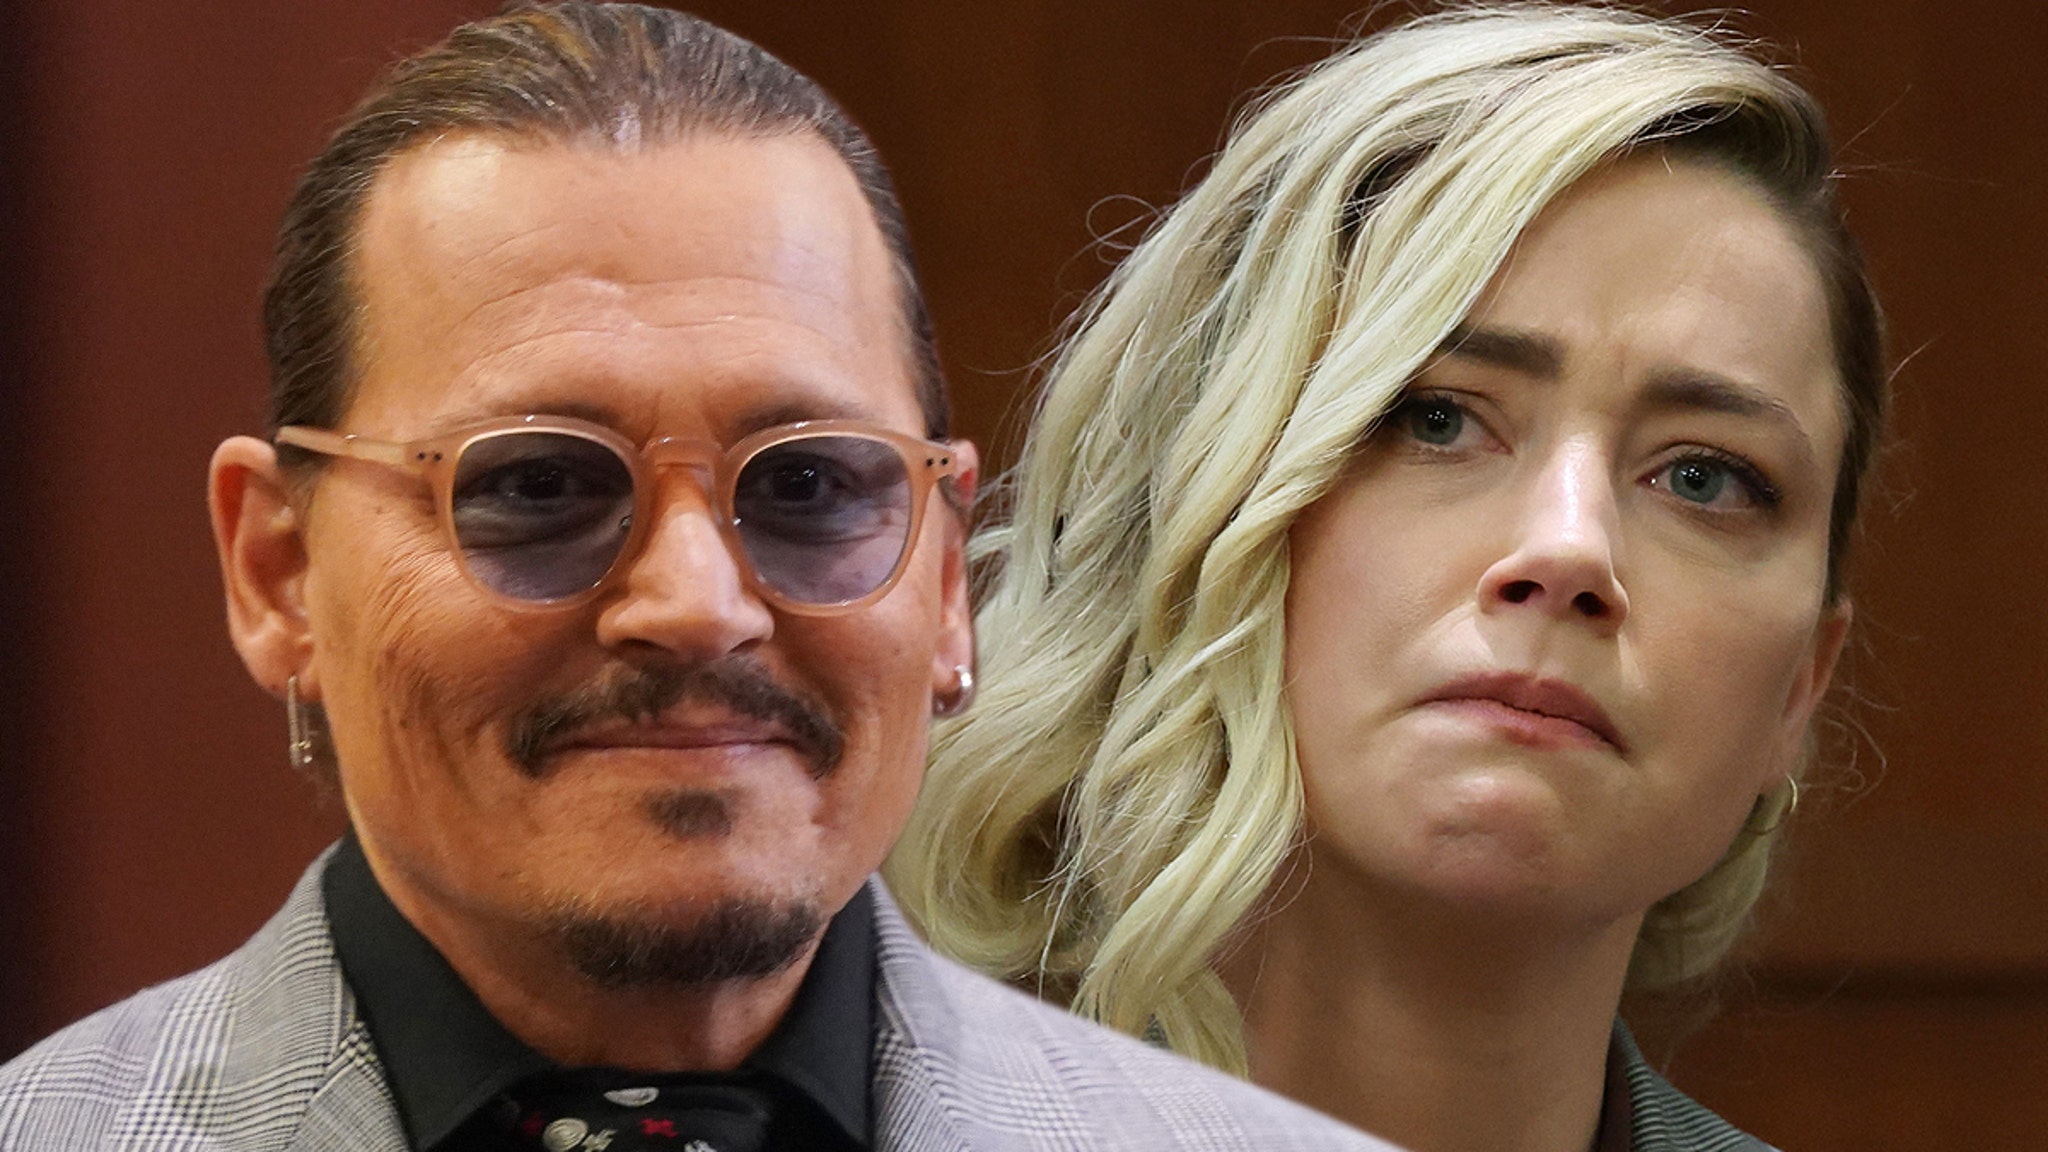 Johnny Depp Says 'Jury Gave Me My Life Back' After Heard Defamation Case Win